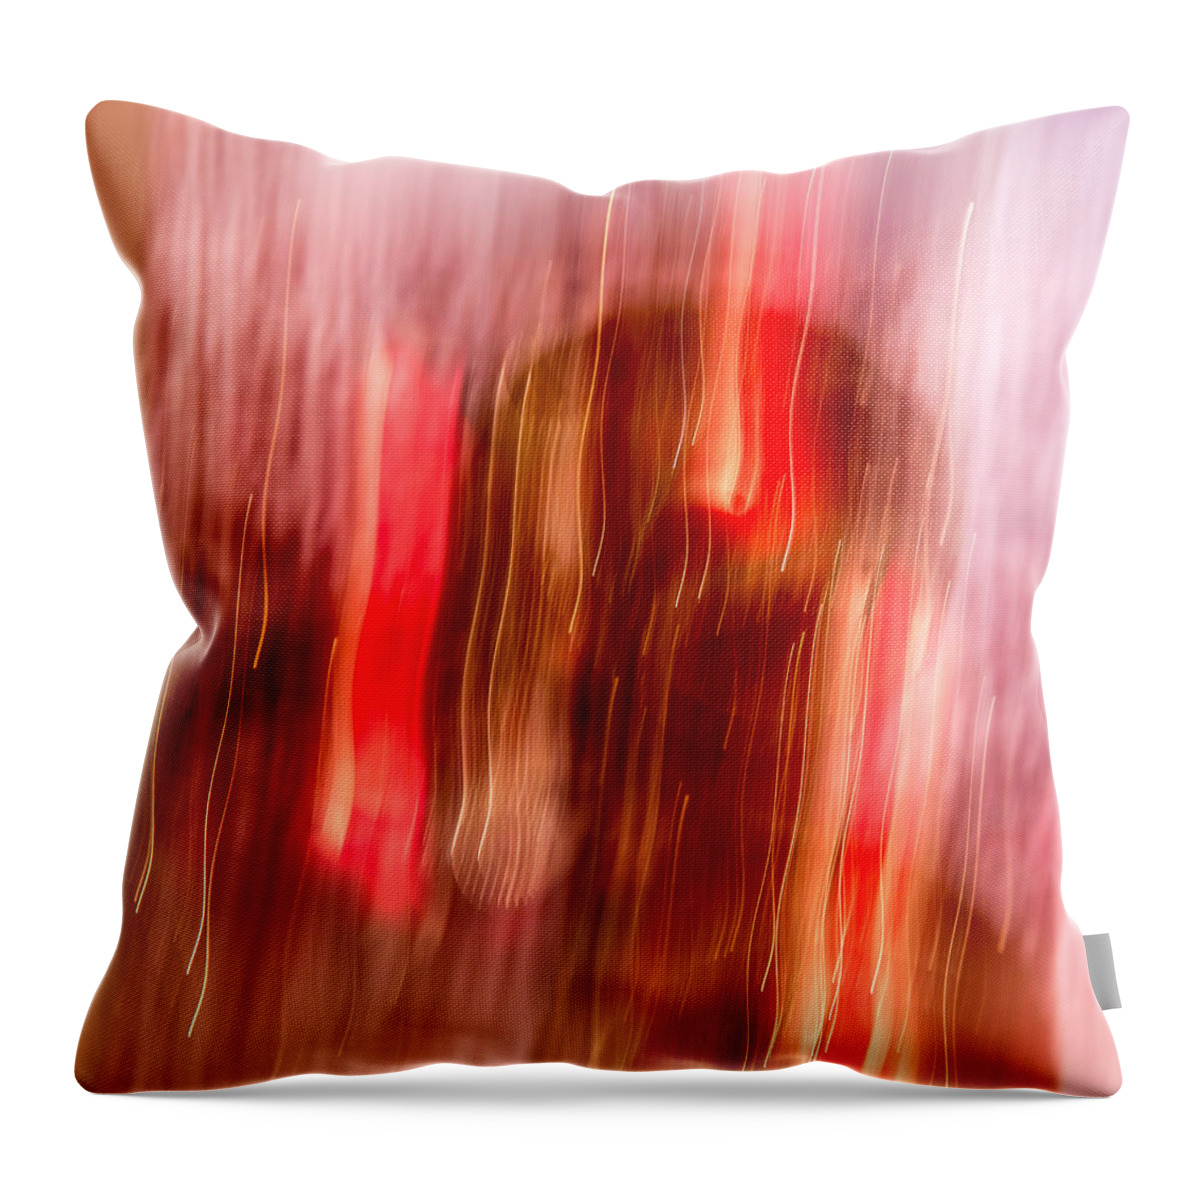 Ornament Throw Pillow featuring the photograph Ornament Abstract 6 by Rebecca Cozart